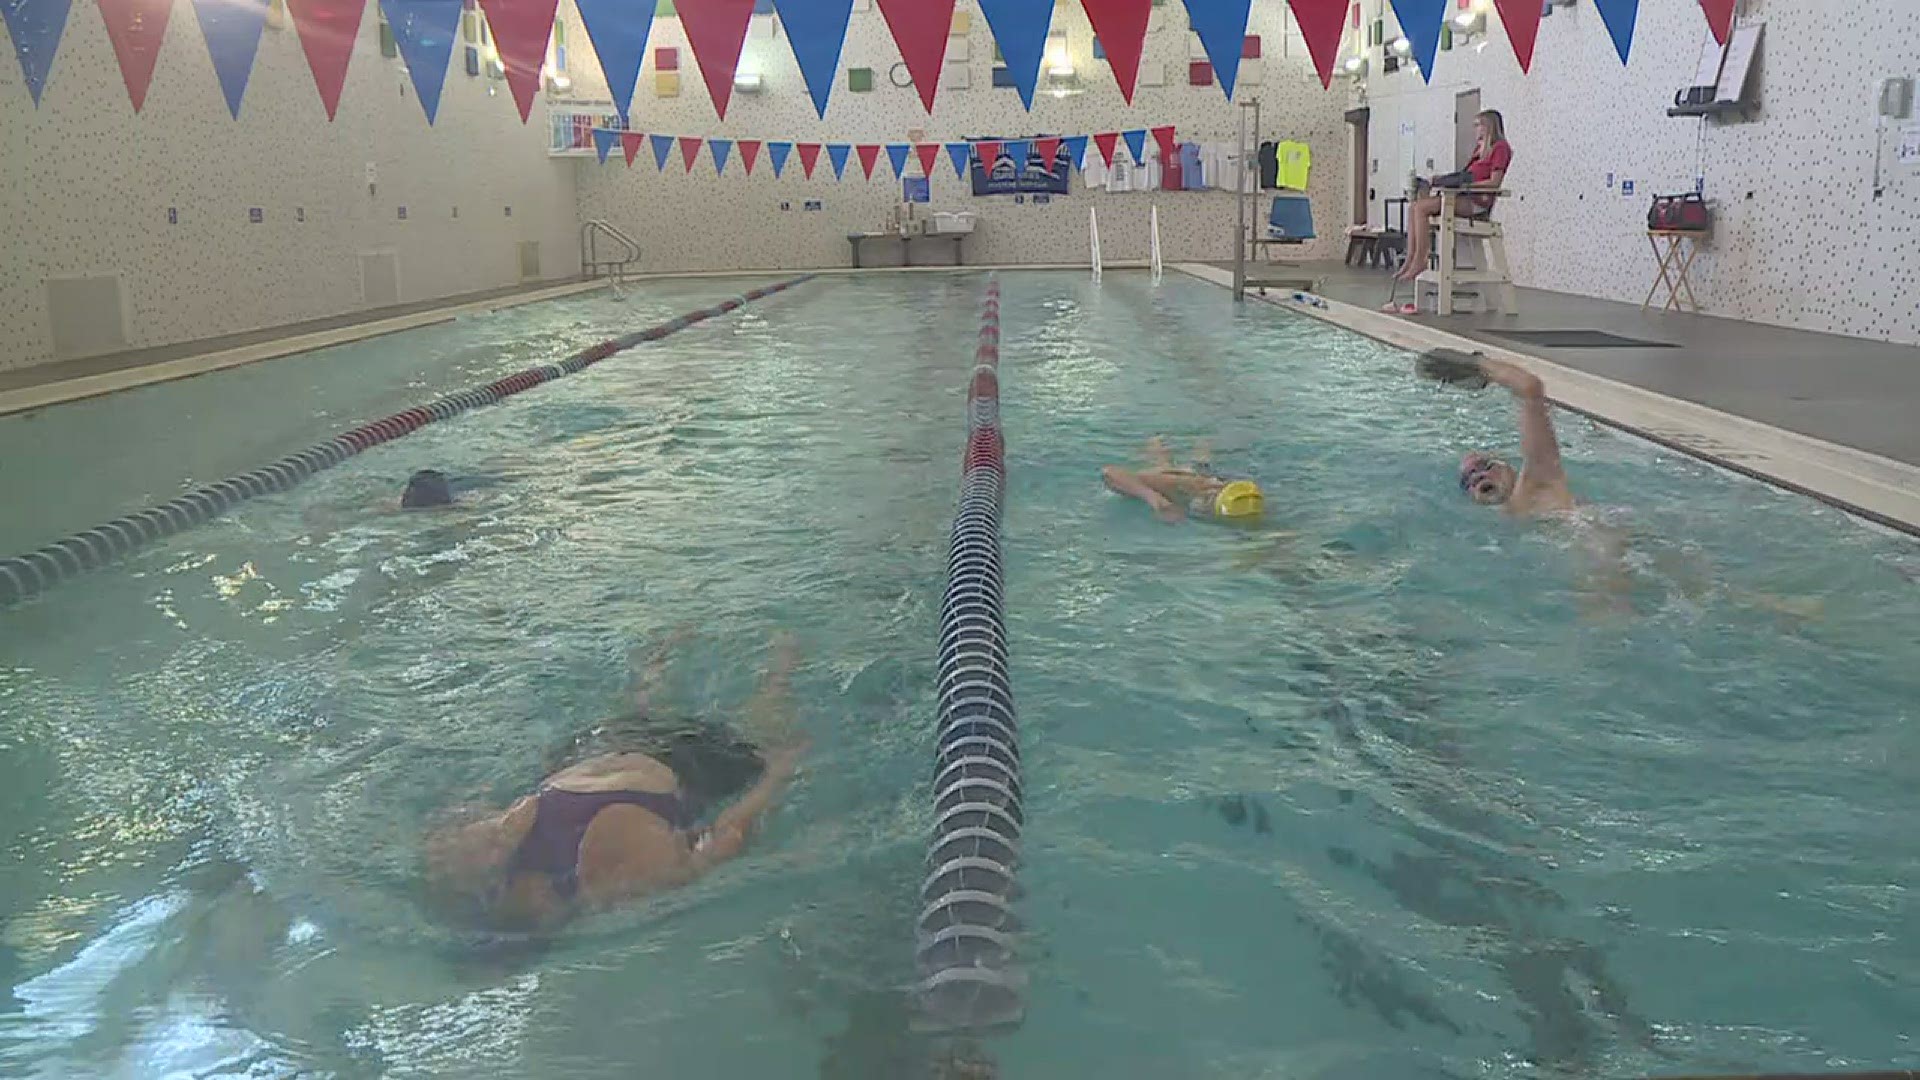 Saying goodbye after 30 years the QC Masters Swimming Club swims their final lap in their original pool wqad